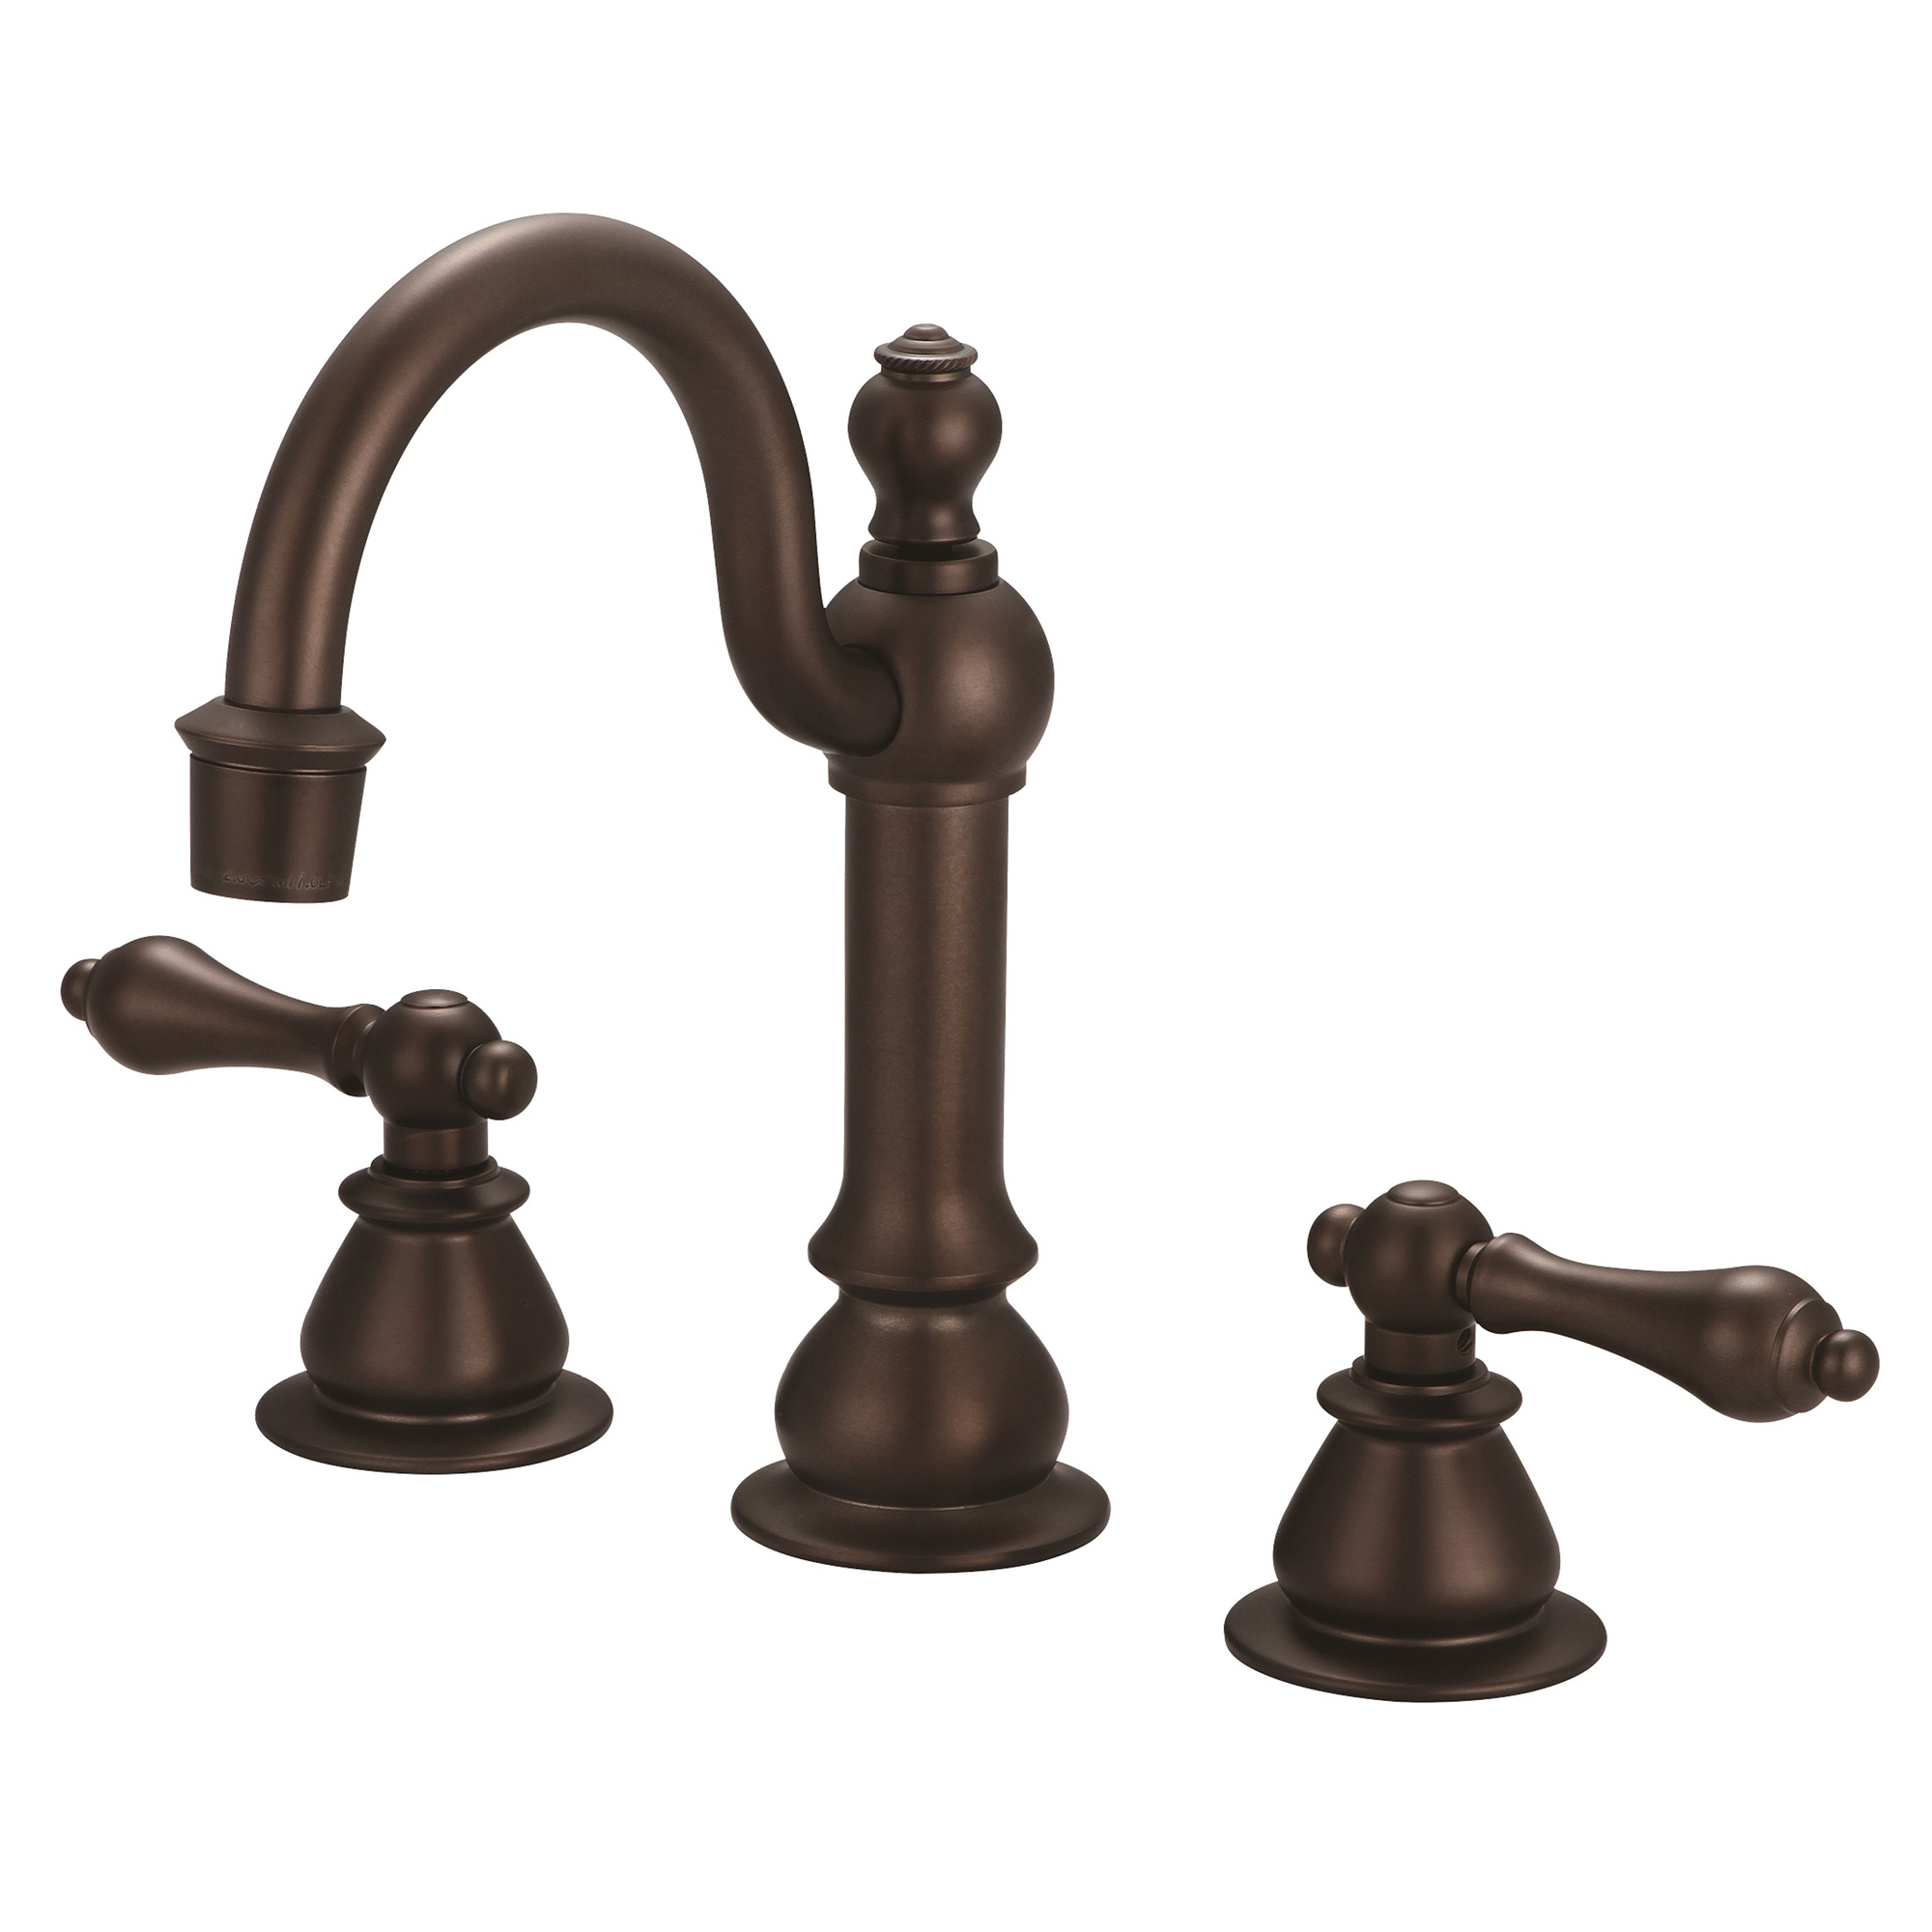 American 20th Century Classic Widespread Lavatory Faucets With Pop-Up Drain in Oil-rubbed Bronze Finish With Metal Lever Handles